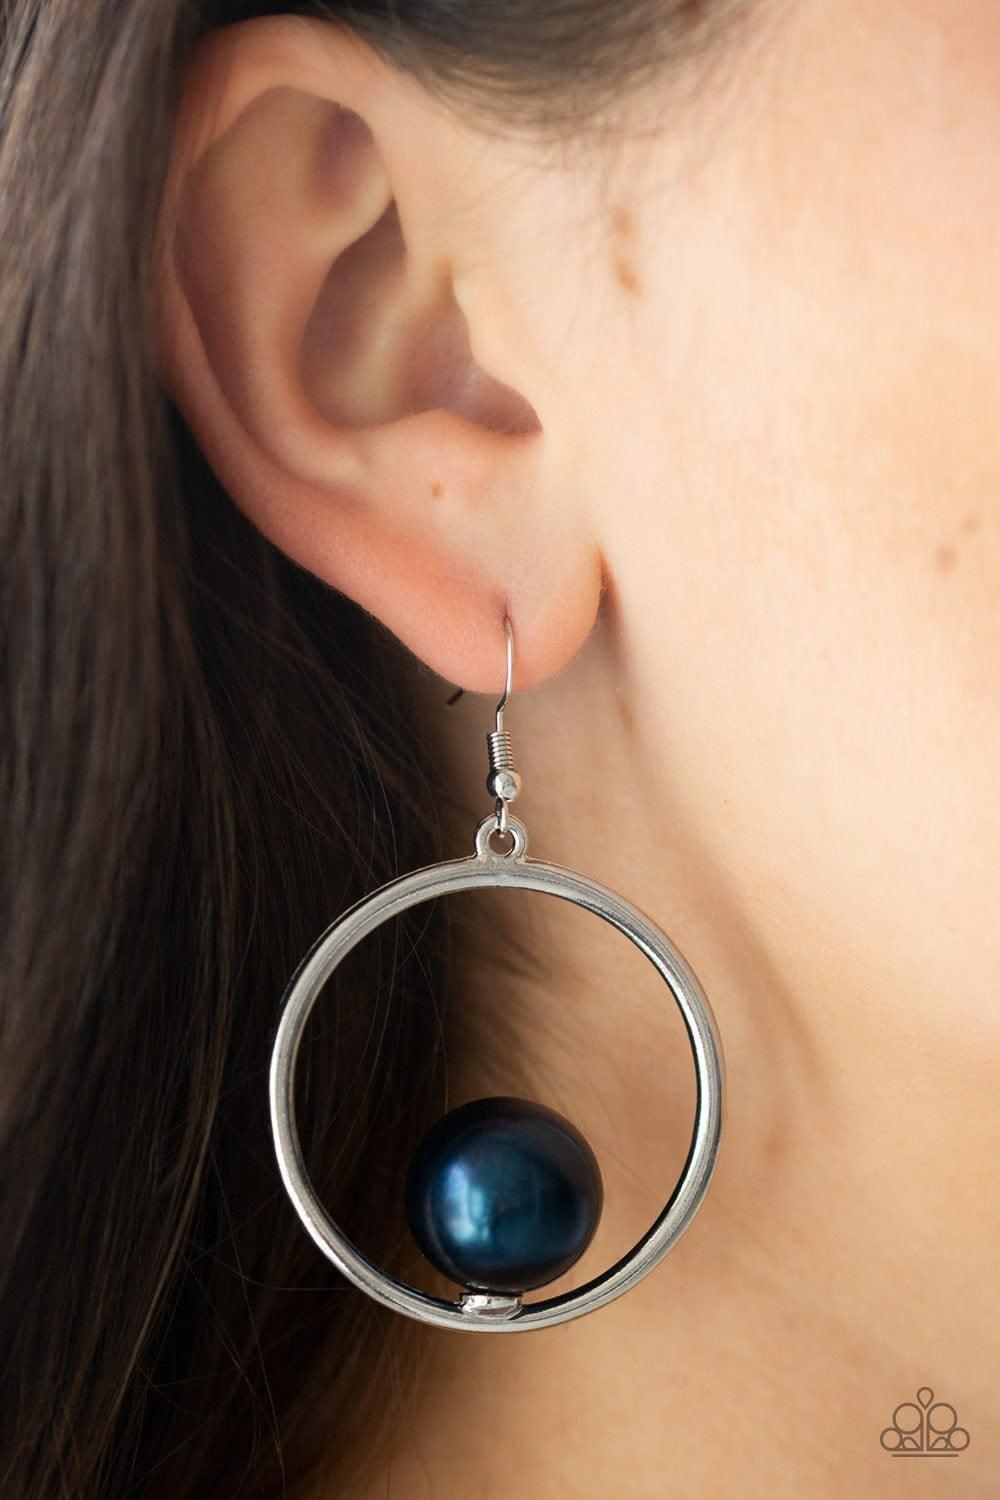 Paparazzi Accessories - Solitaire Refinement - Blue Earrings - Bling by JessieK